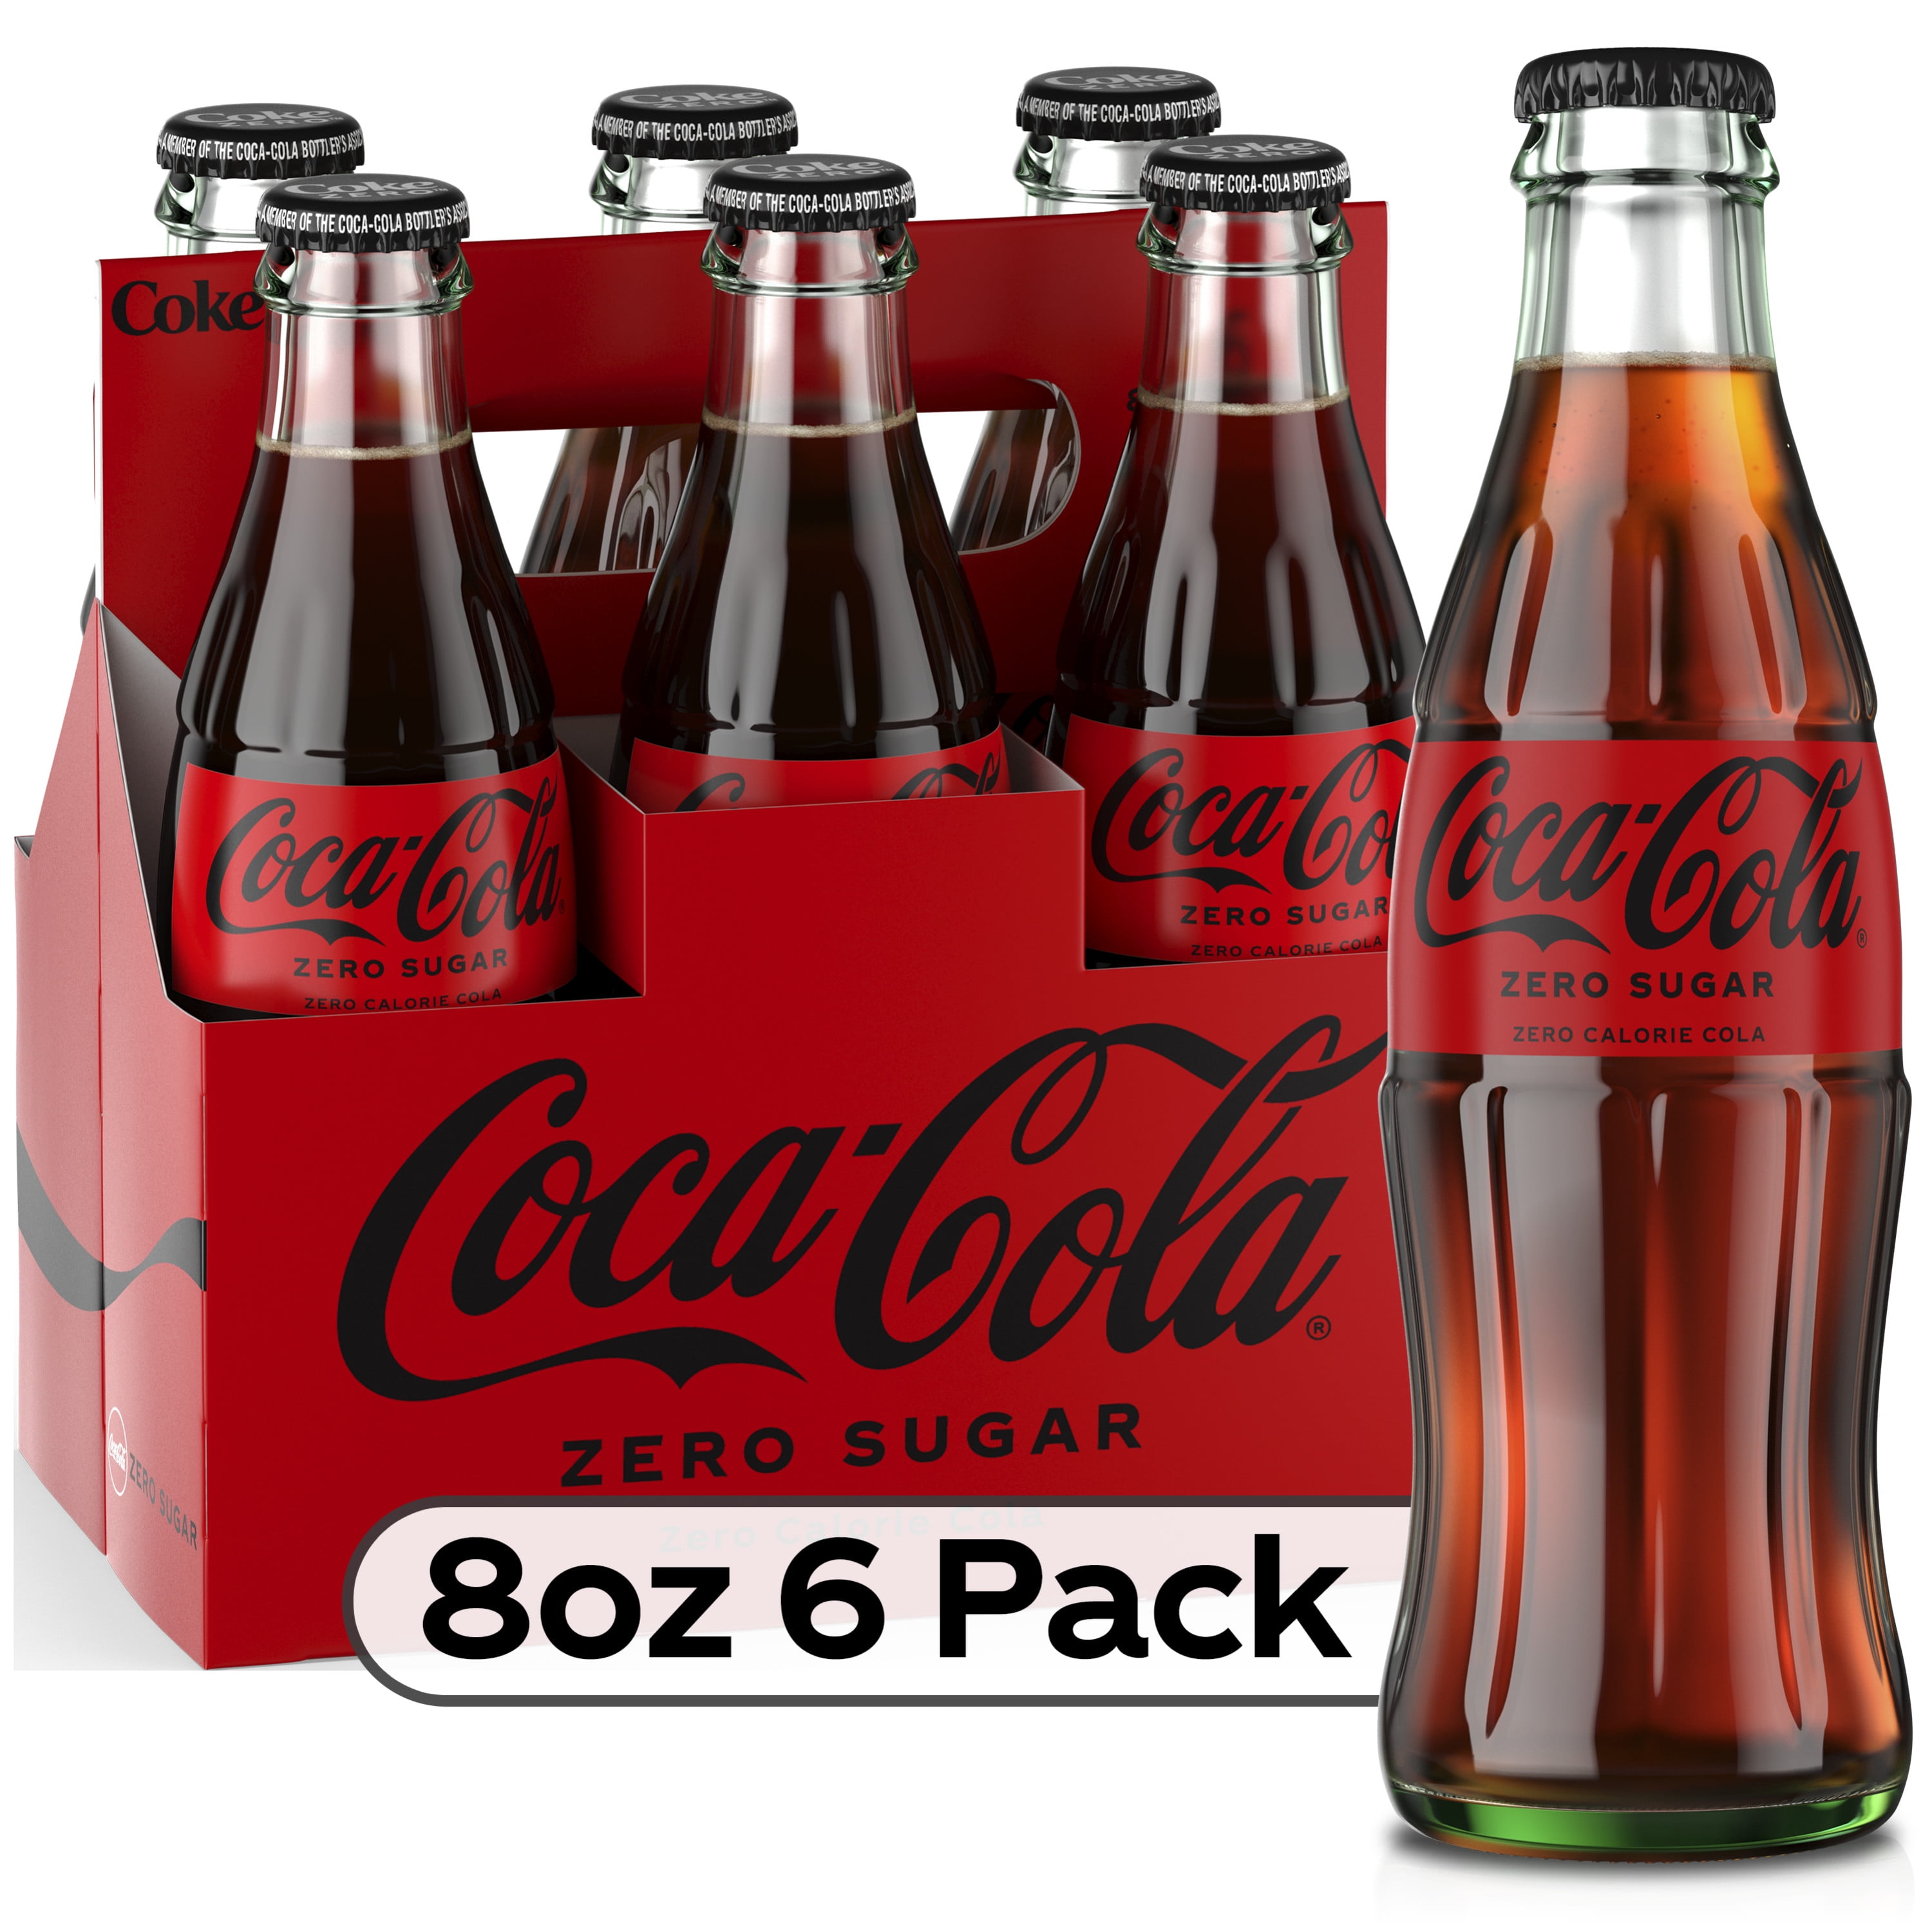 Coca Cola 24 x 8oz Glass Bottles Delivery in Brooklyn, NY